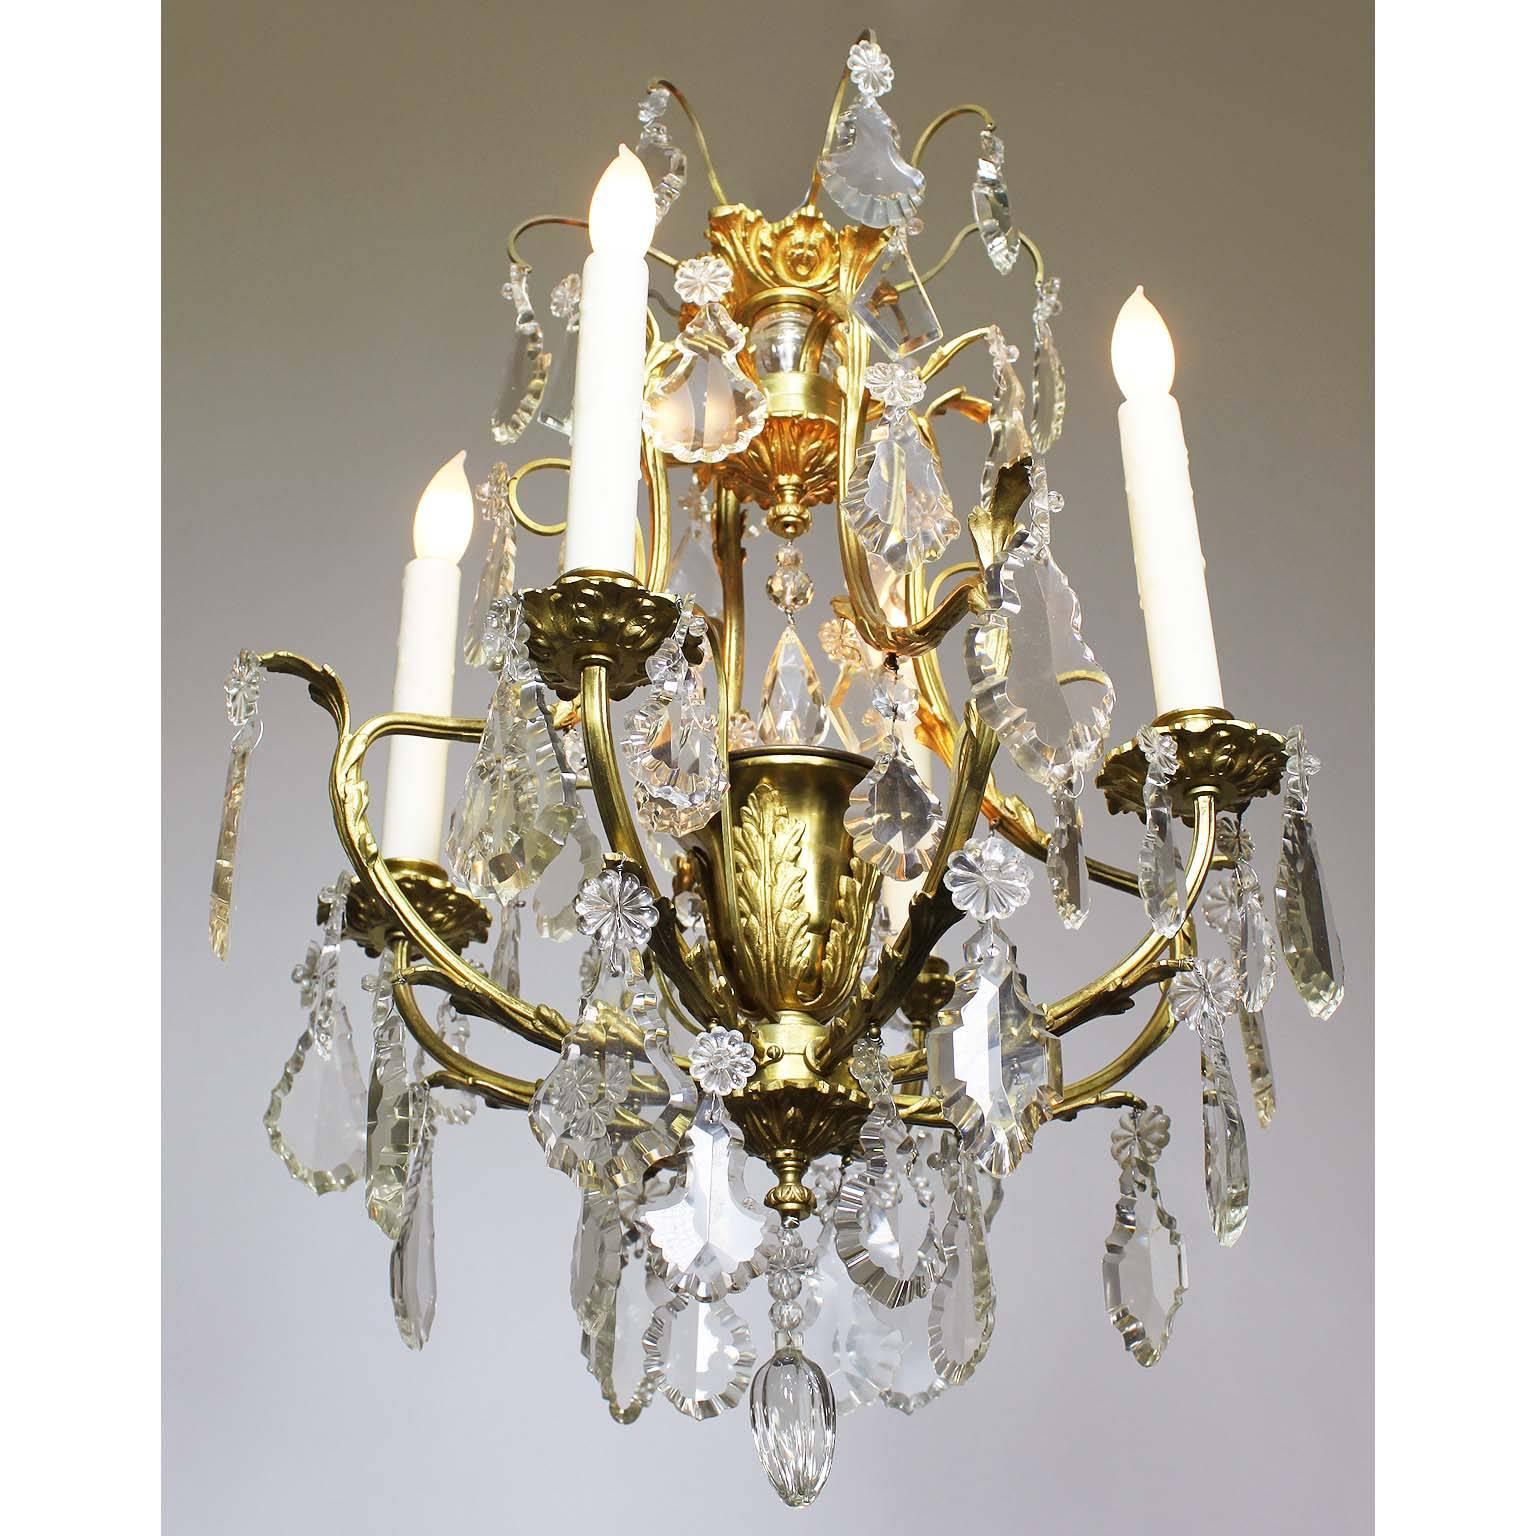 A charming French Louis XV style gilt bronze and cut-glass four-light chandelier. The cage gilt bronze frame surmounted with cut-glass pendants, four candle-arms and a central cup-light, Paris, circa 1900-1920.

Measures: Height 22 1/2 inches